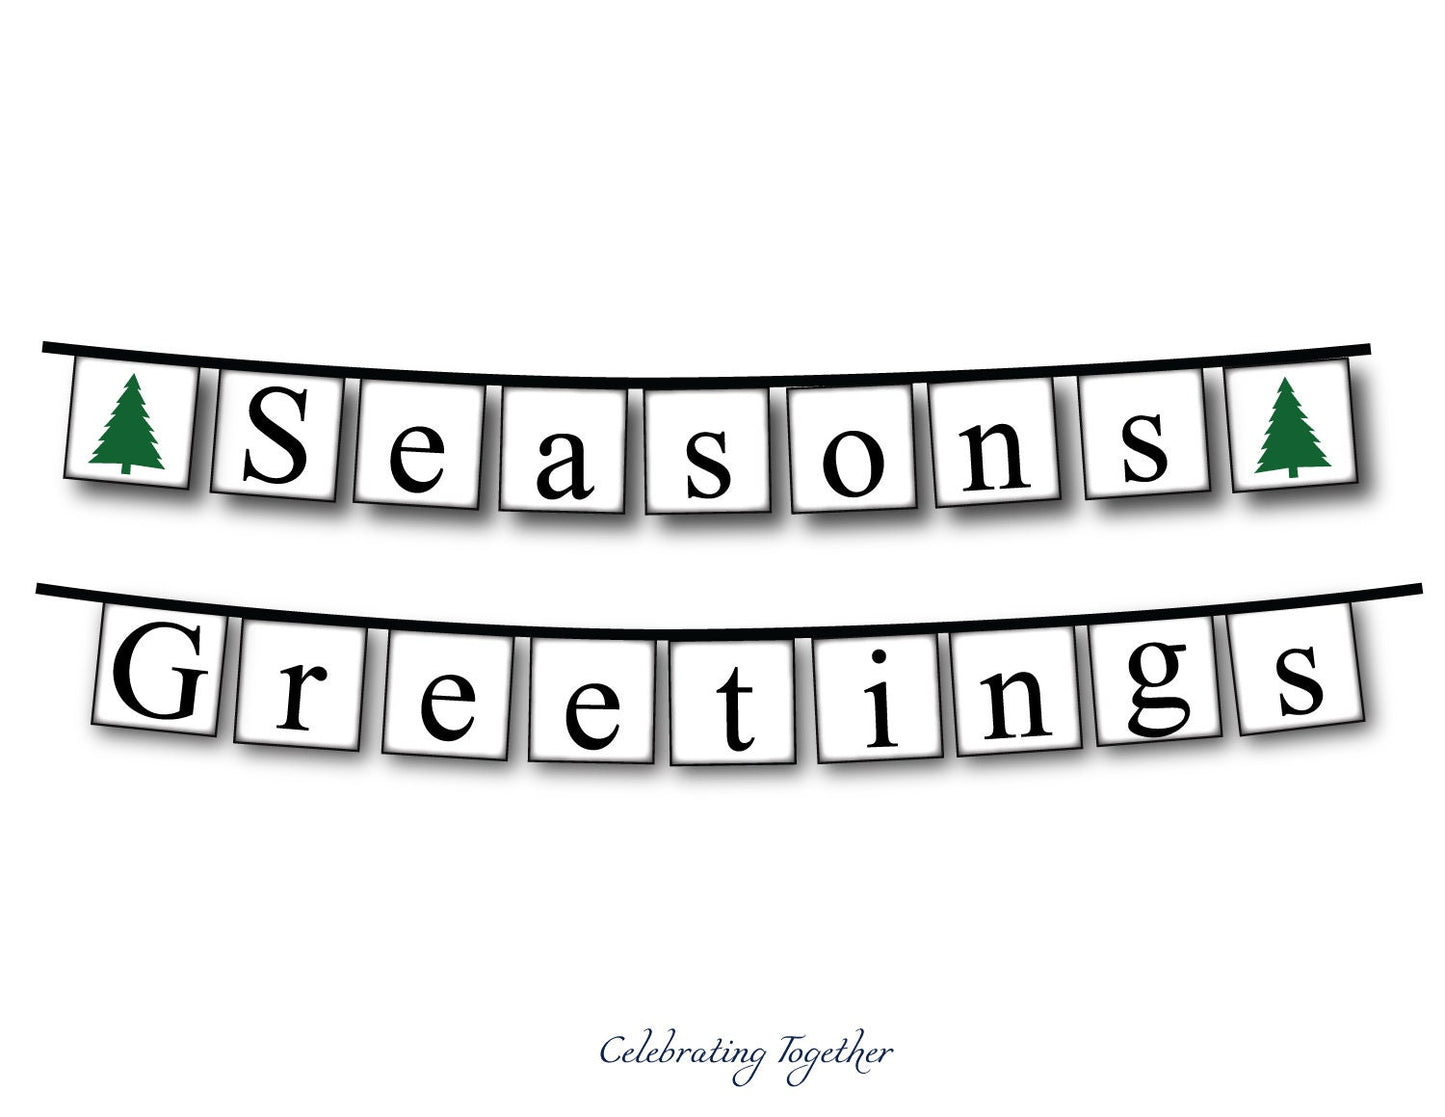 PRINTABLE Seasons Greetings Banner with evergreen trees, instant download christmas garland for living room mantel, merry christmas sign